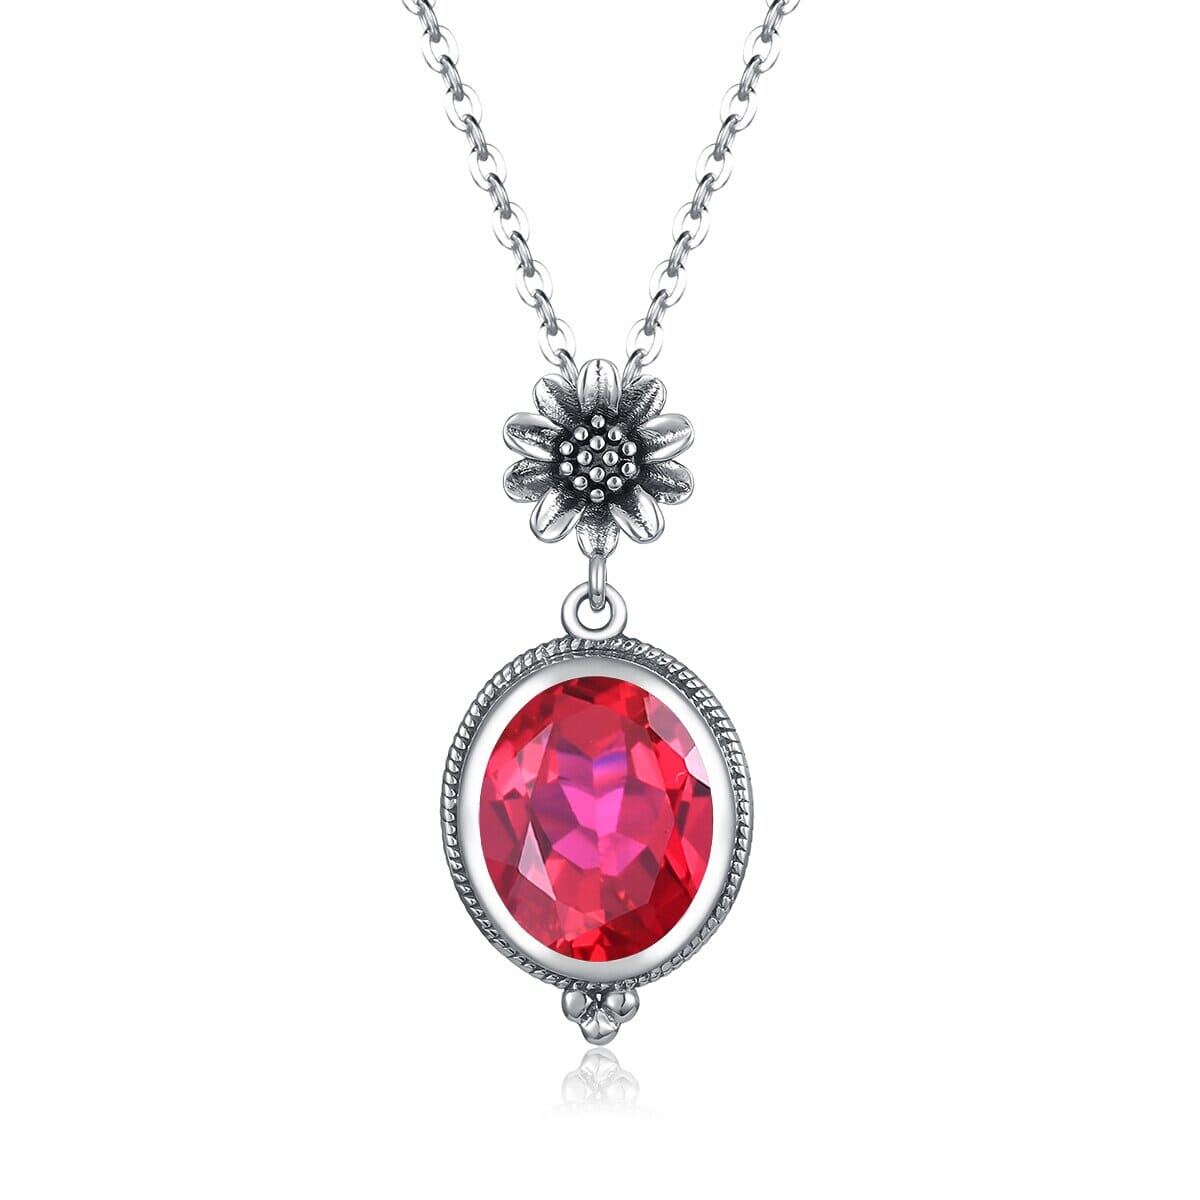 Sunflower Ruby Pendant 925 Sterling Silver NecklaceNecklace